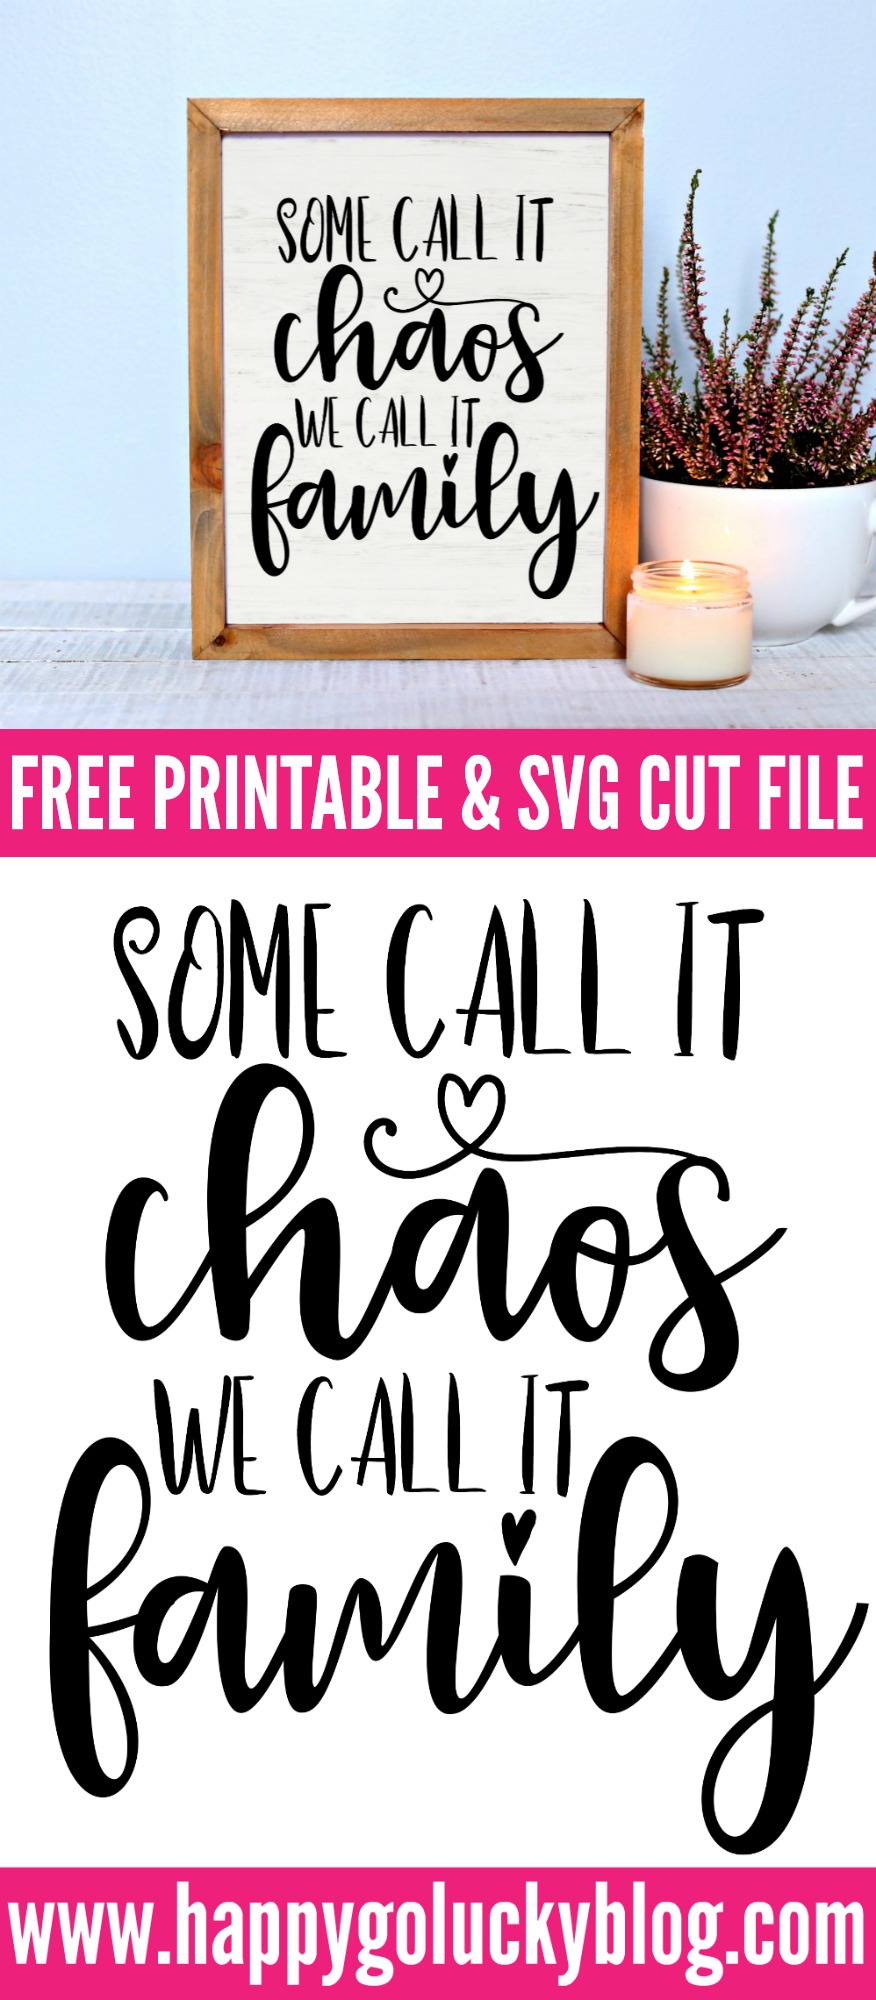 Chaos Family Free Printable and SVG Cut File